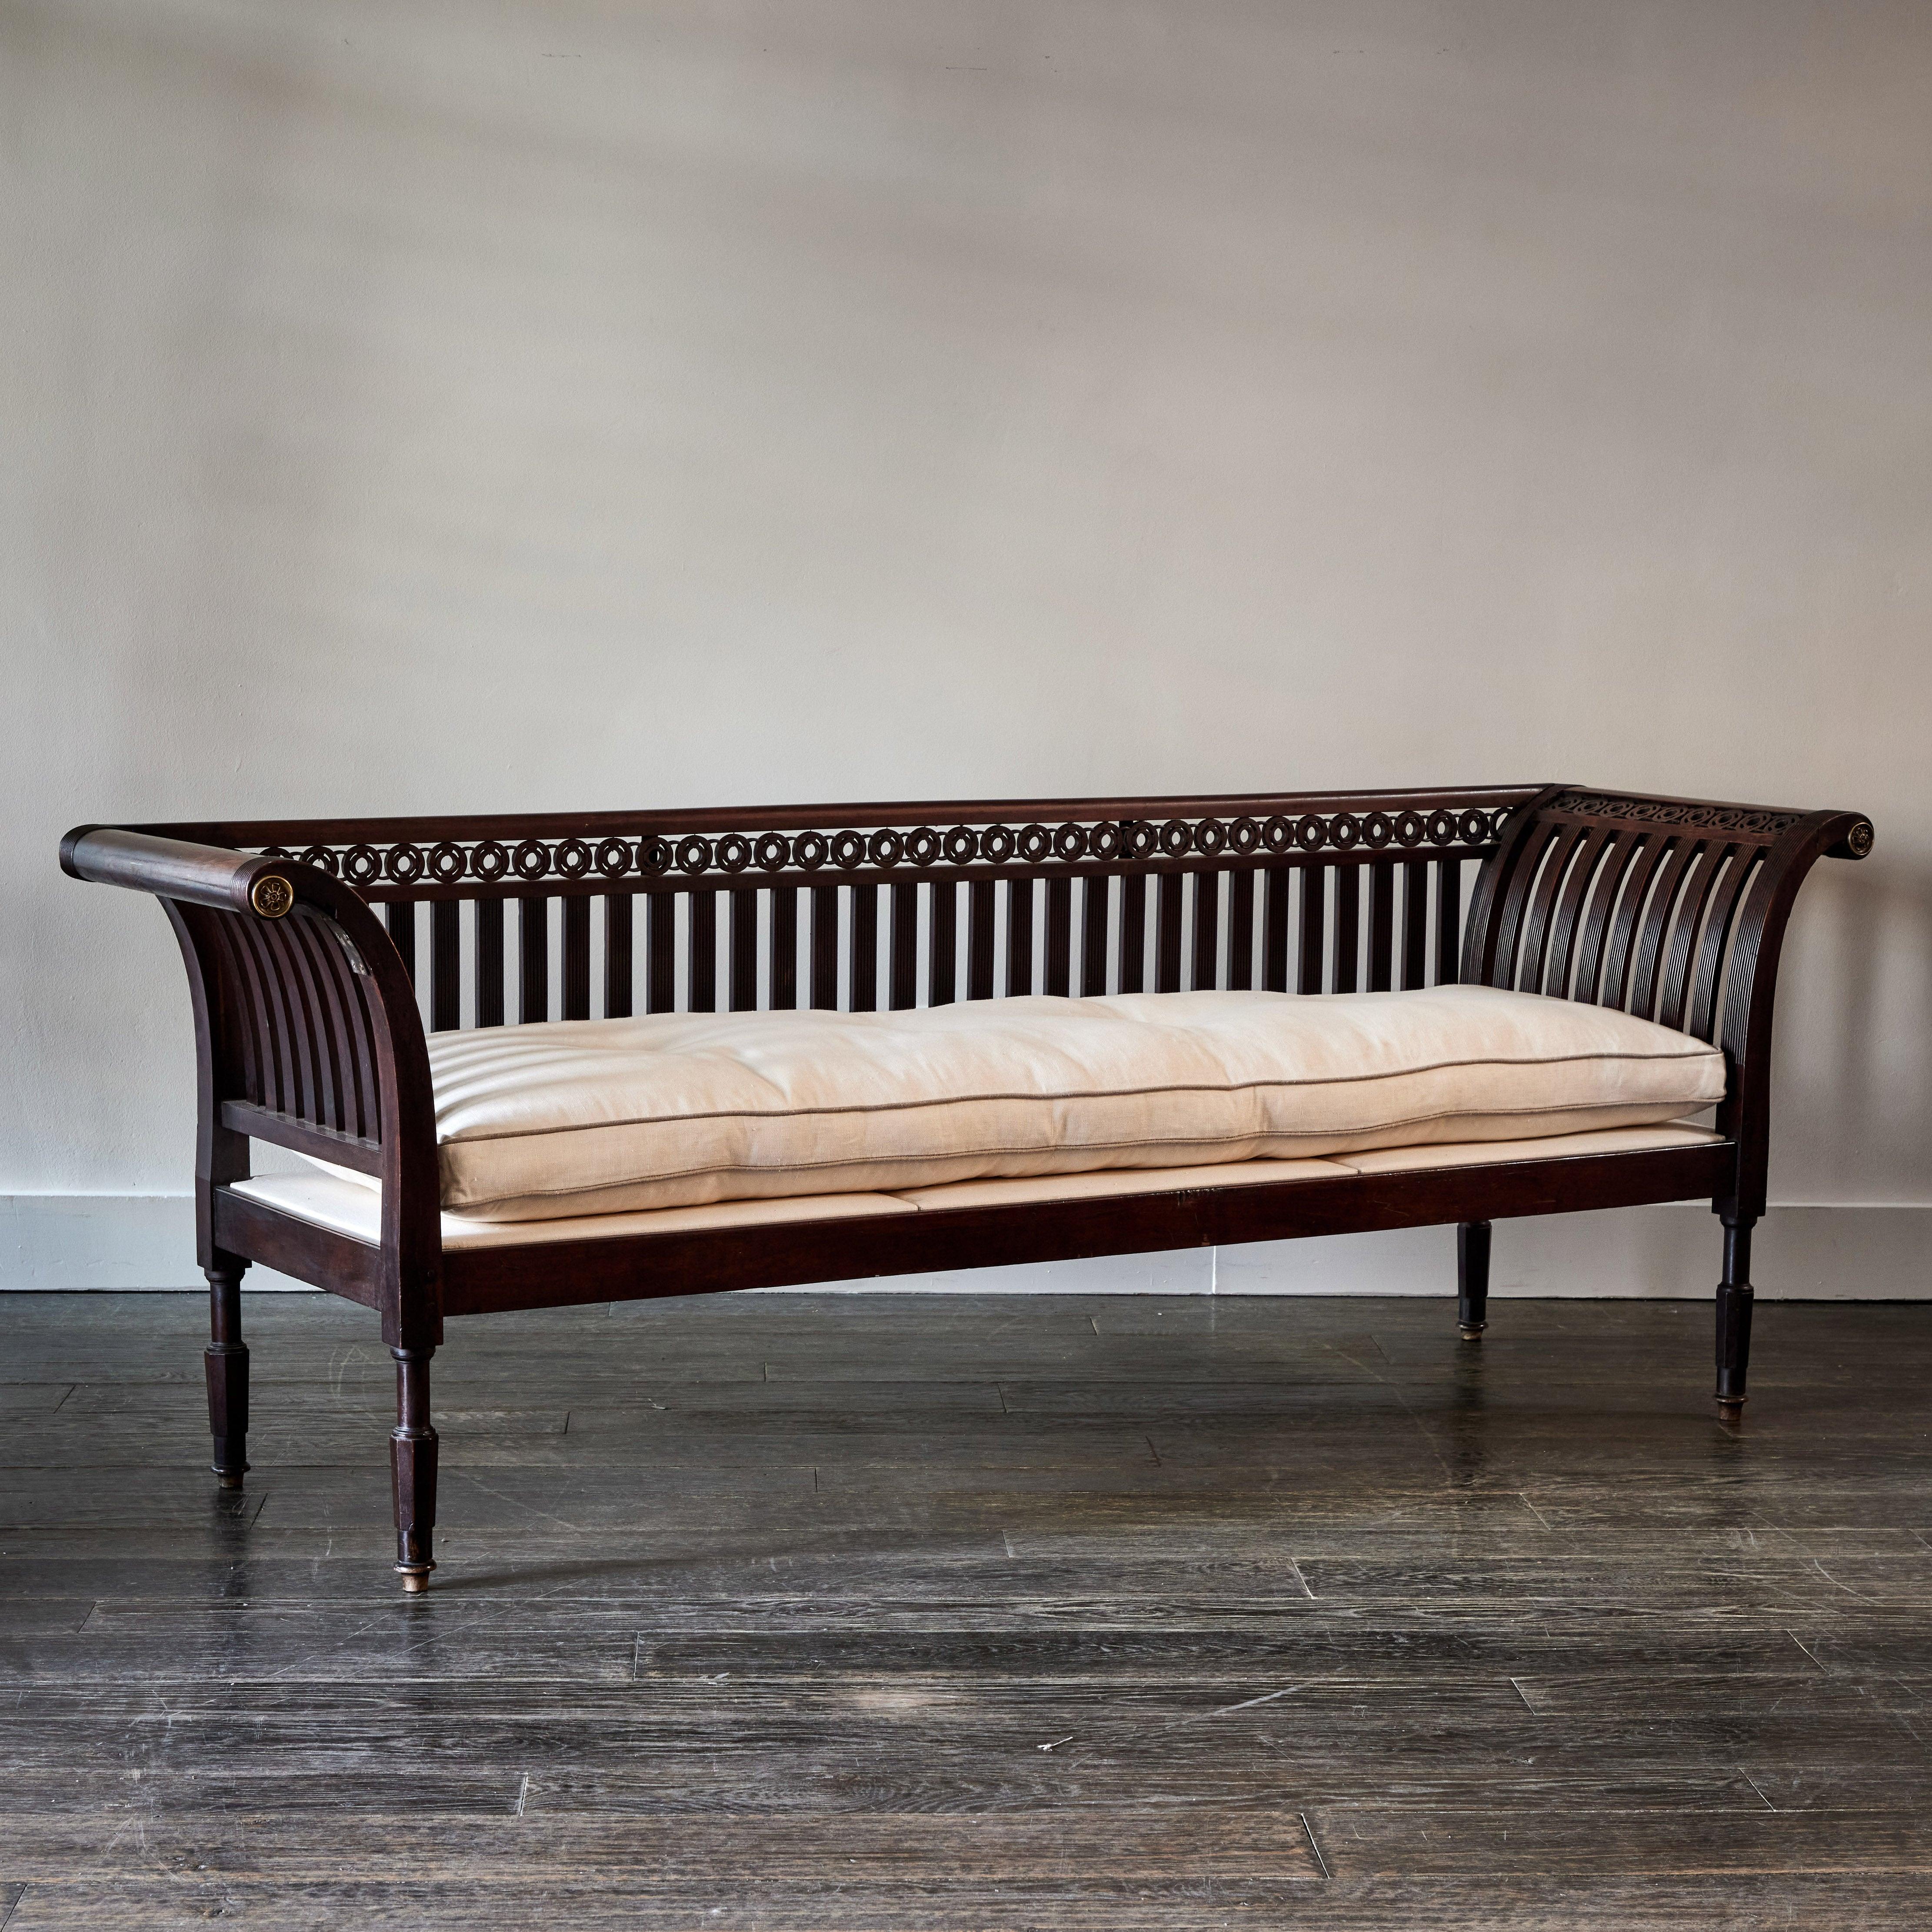 19th Century Neoclassical Wooden Bench